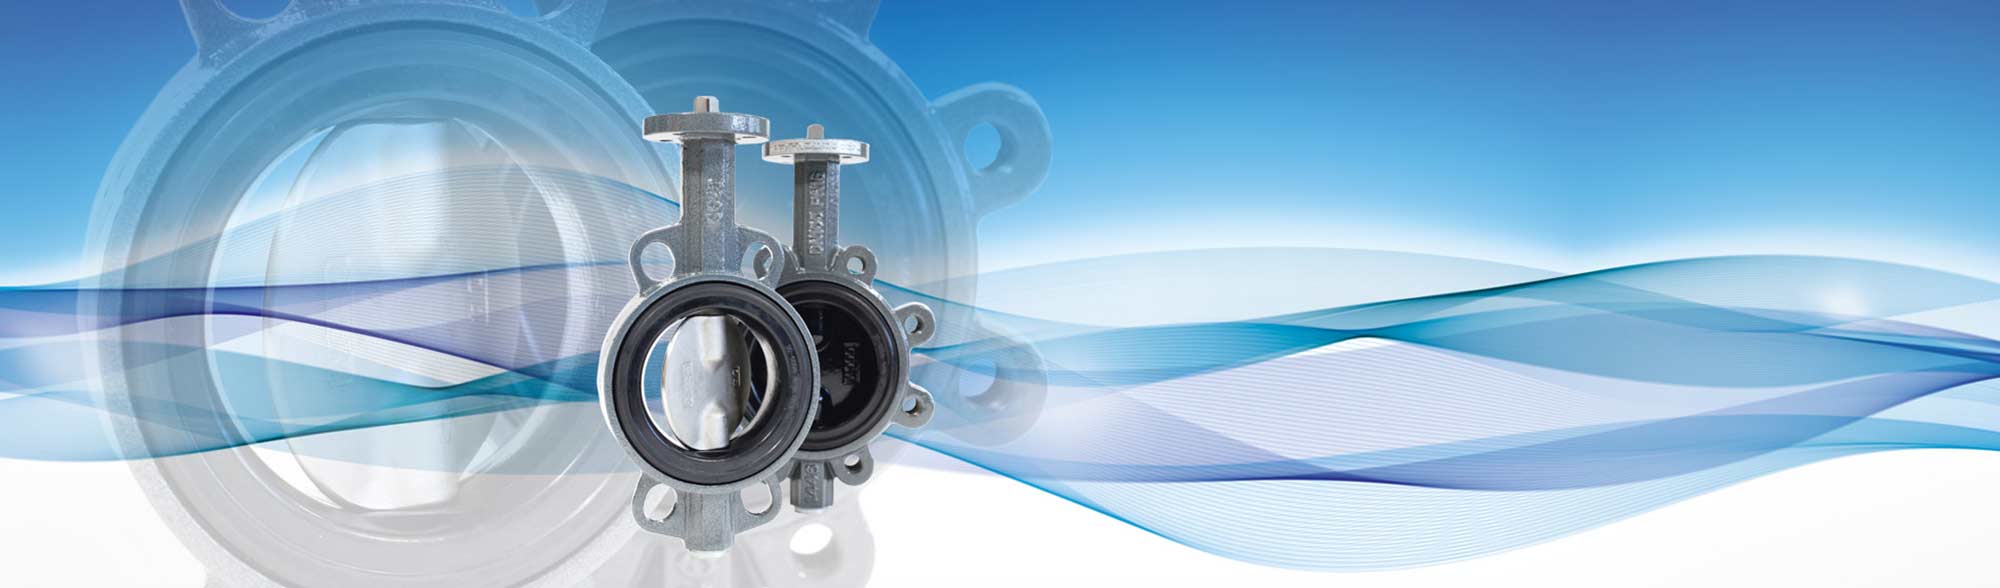 Butterfly Valve Overview